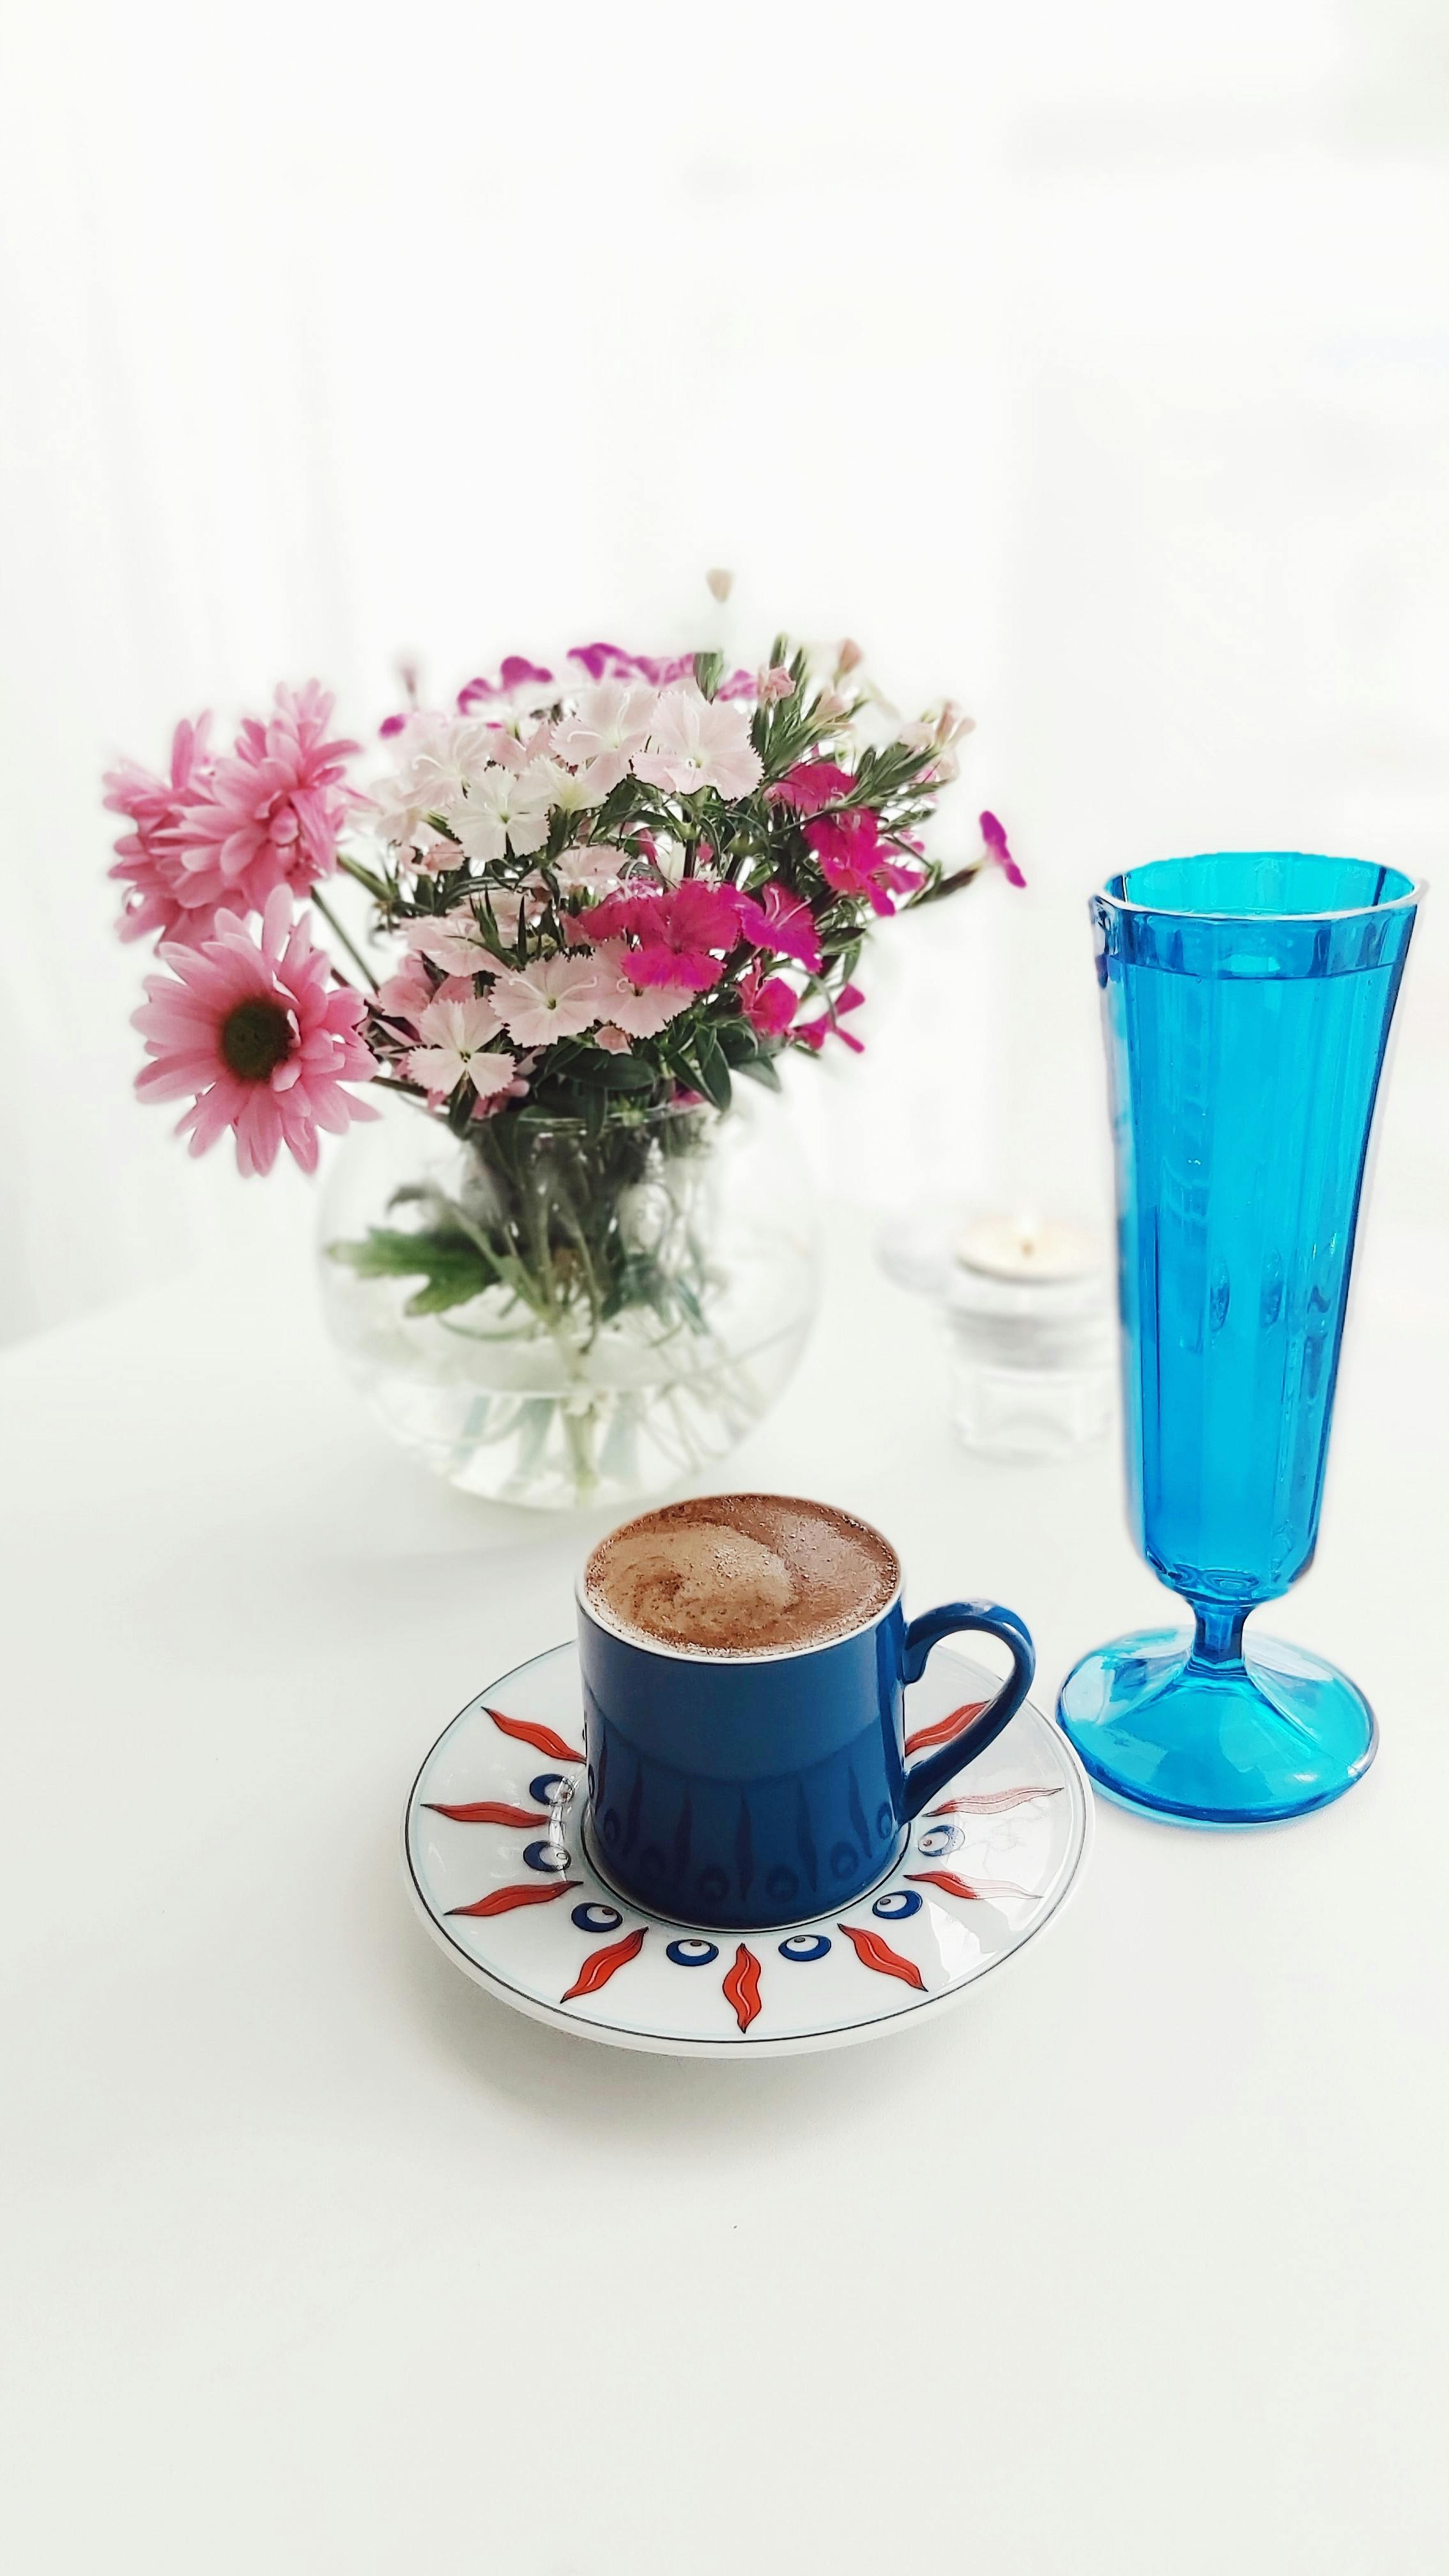 Coffee in Mug and Flowers in Vase · Free Stock Photo